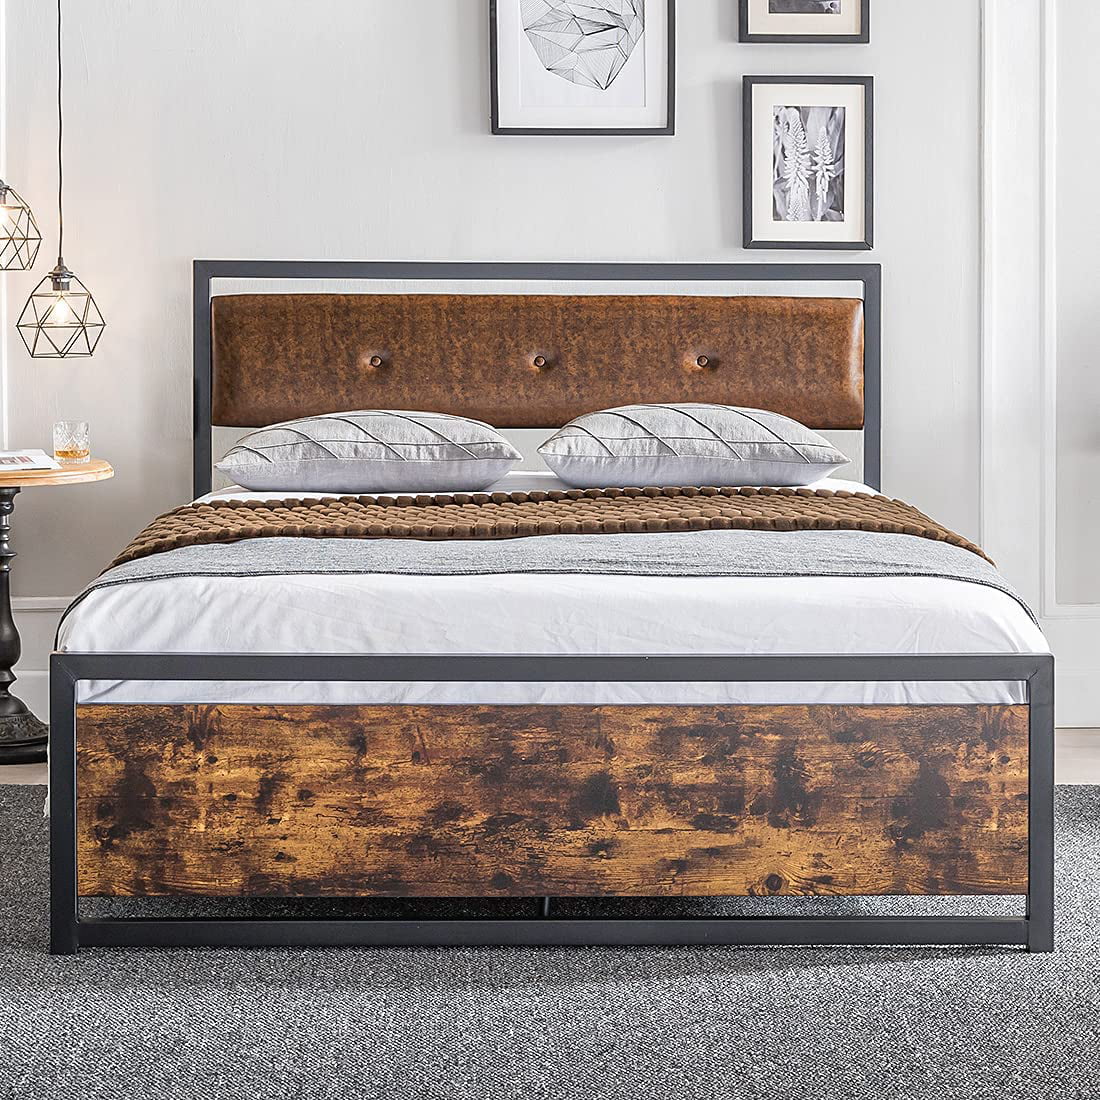 Smile Back Industrial Full Bed Frame, Do You Need A Headboard And Footboard